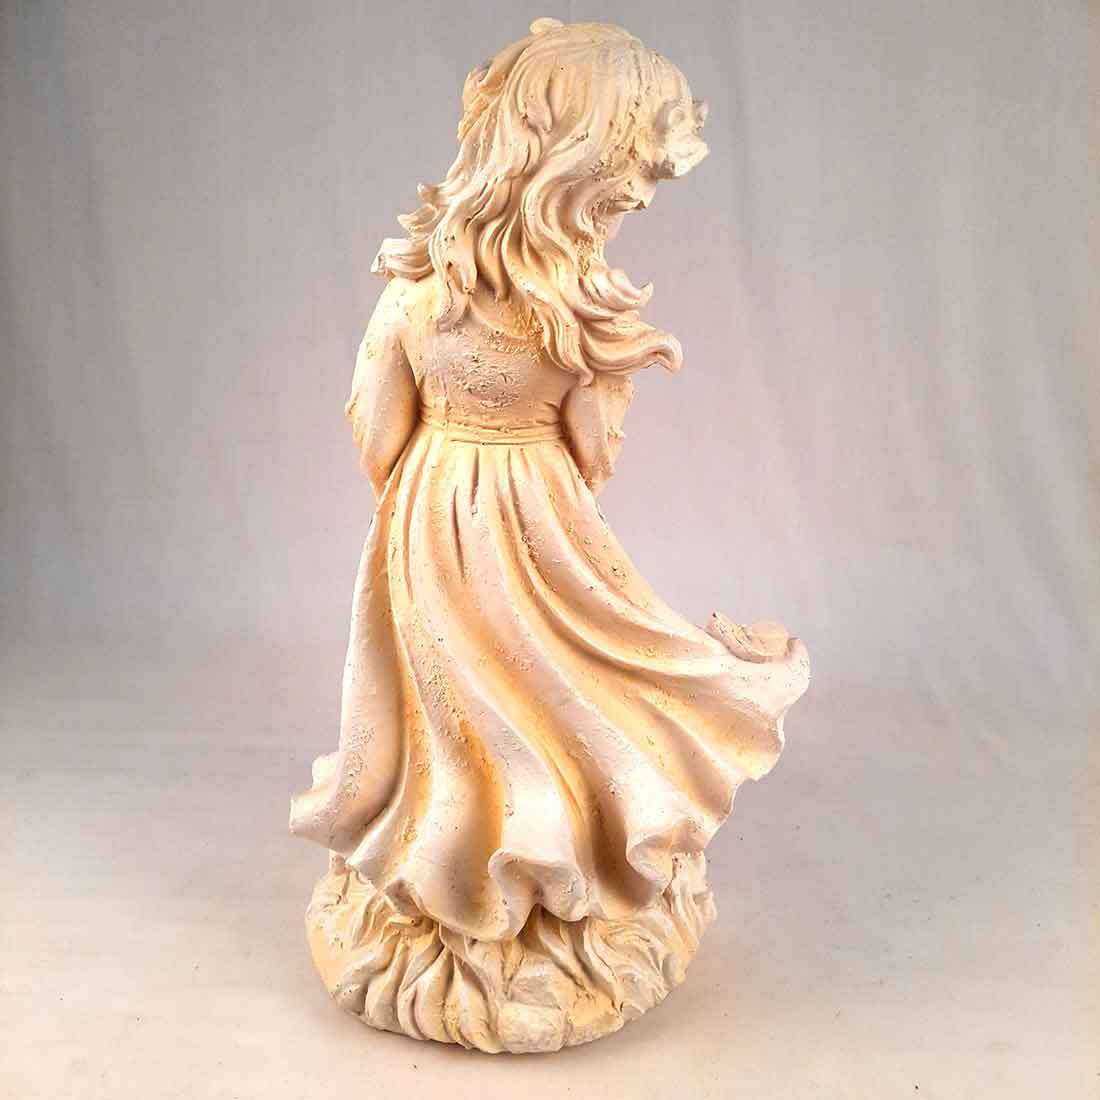 Lady with Basket Showpiece - Lady Figurines - For Table Decor & Living Room - 17 inch - ApkaMart